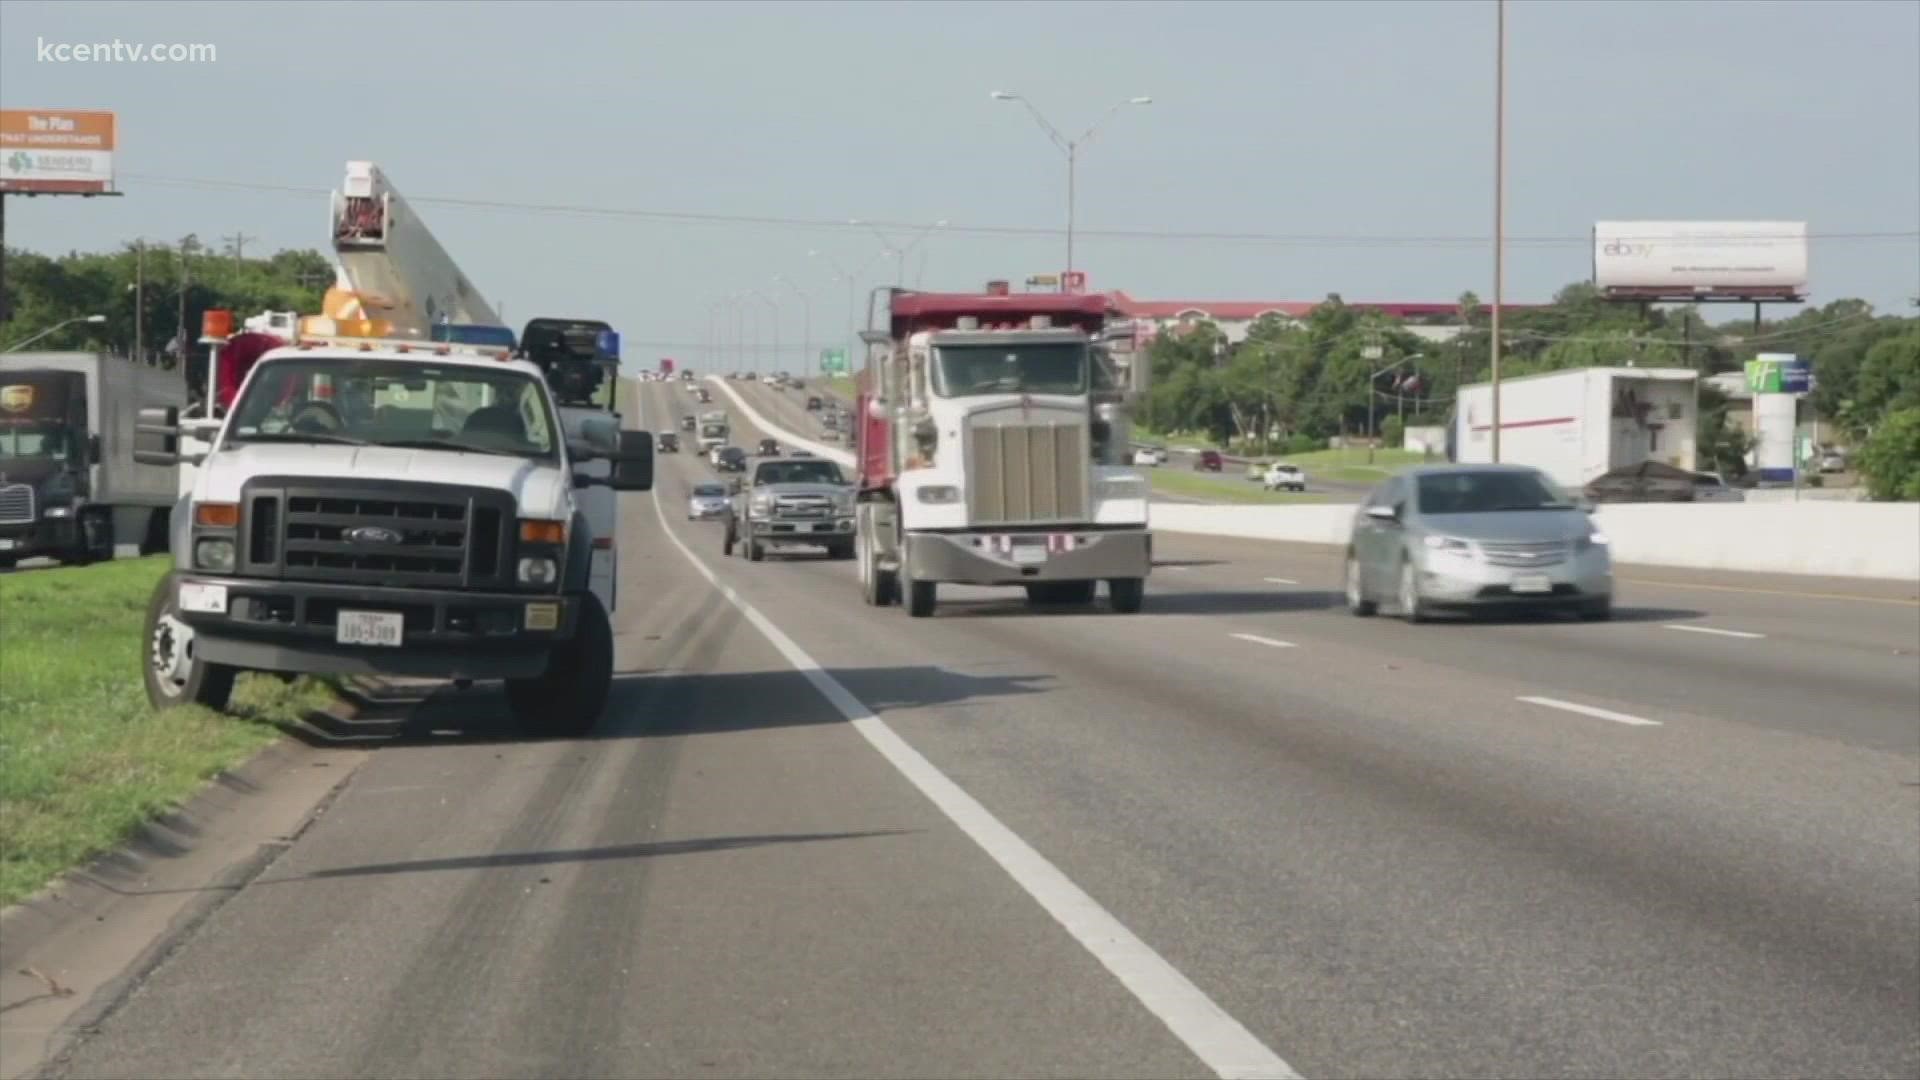 TxDOT launches new initiative to create awareness for construction workers in dangerous or high traffic work zones.